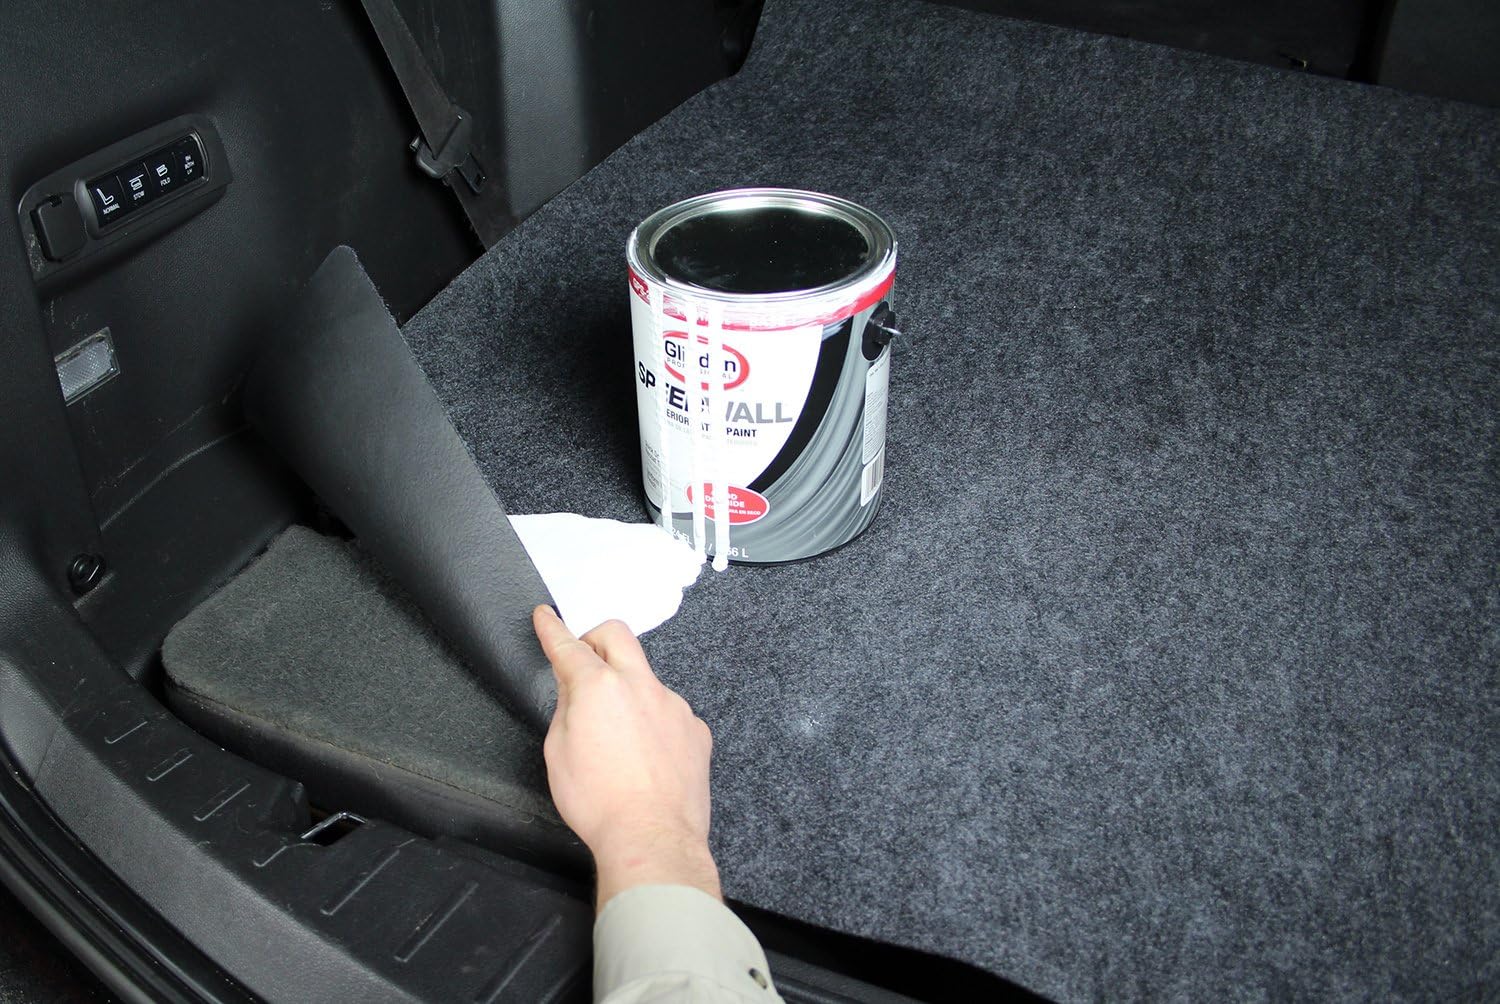 Dry Mate Armor All Medium Cargo Liner Charcoal